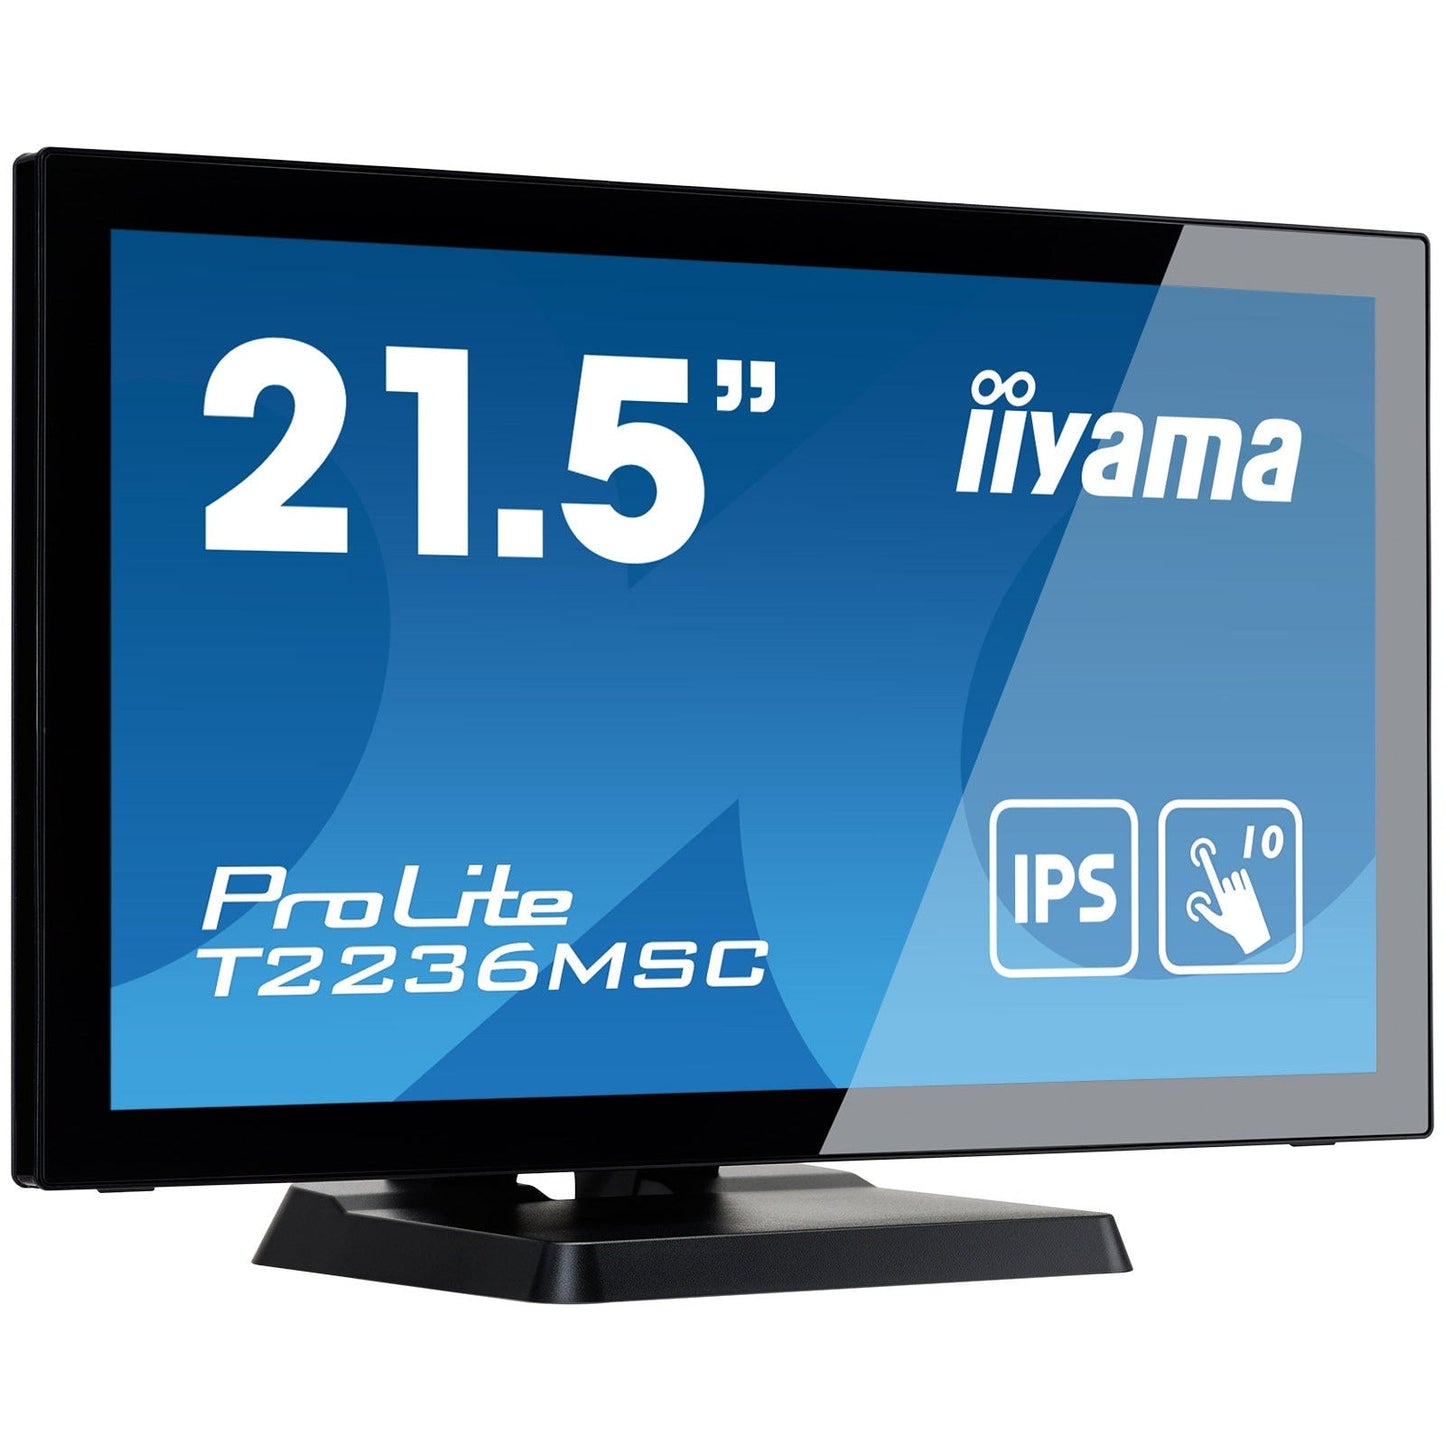 Steel Blue iiyama ProLite T2236MSC-B3 22" 10 point Touch Screen with edge-to-edge glass and AMVA panel